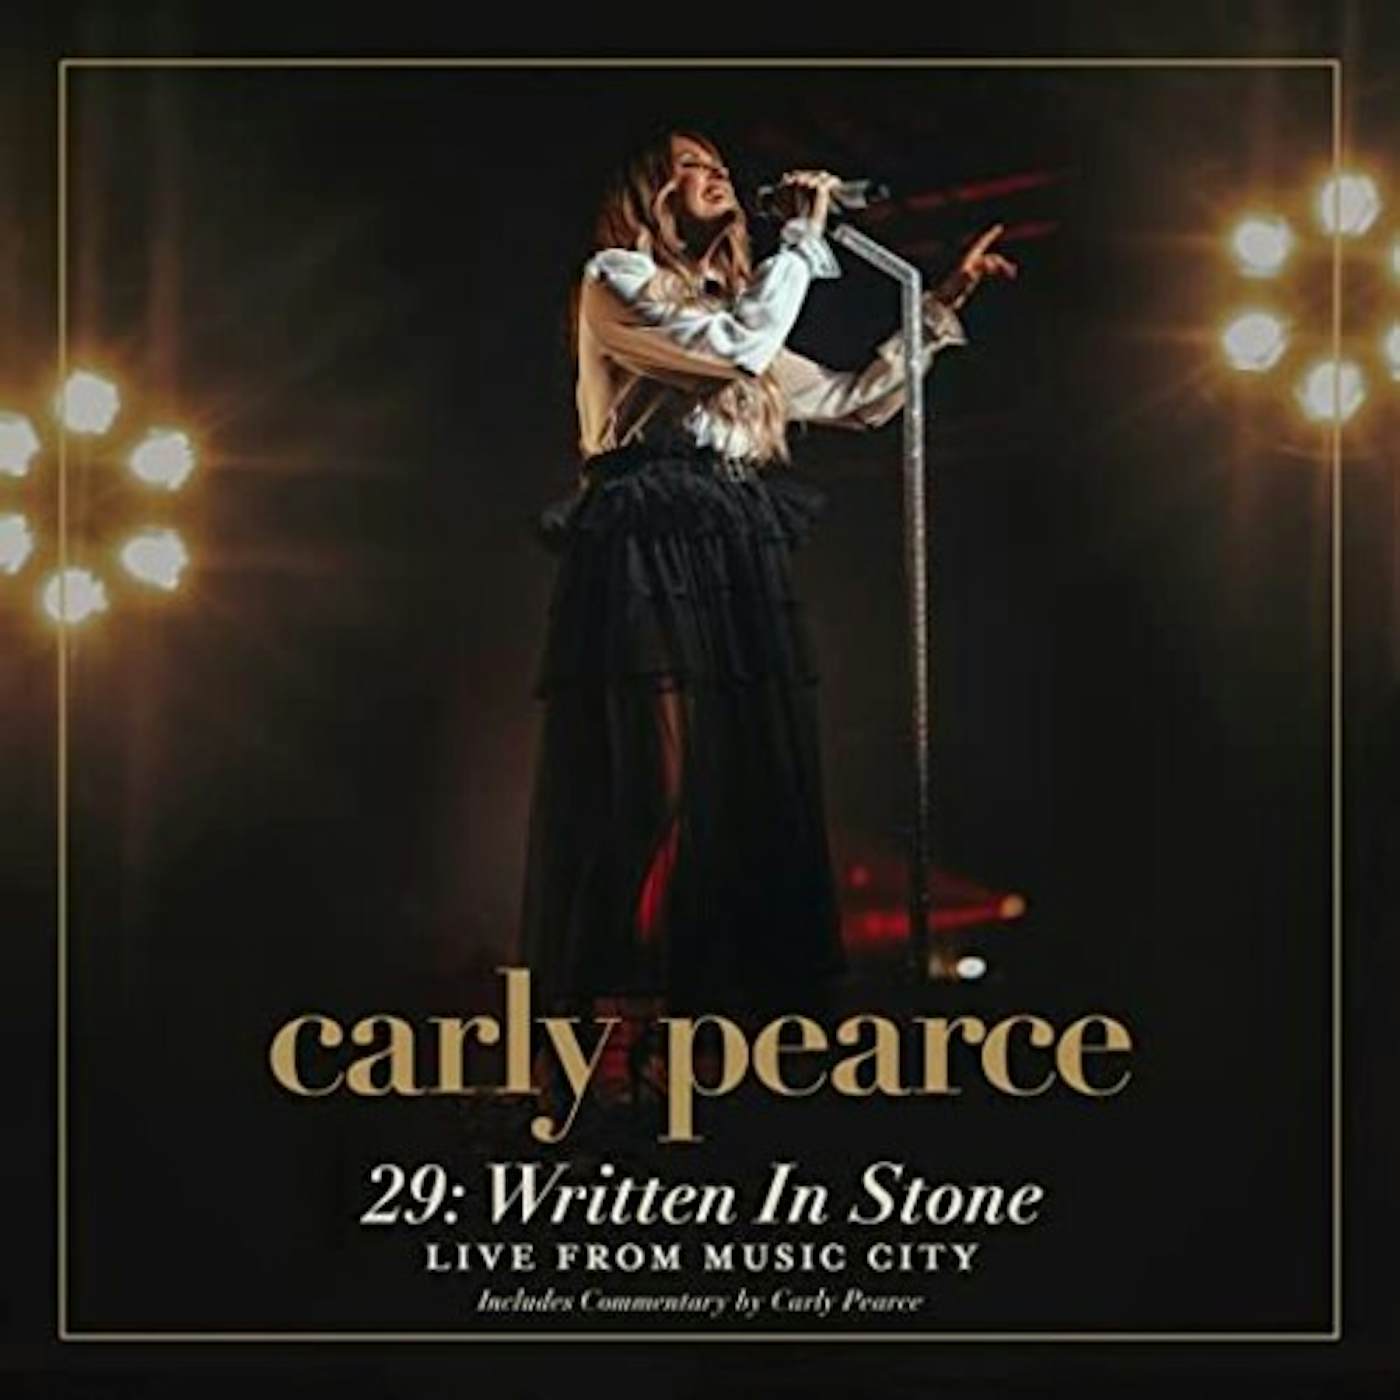 Carly Pearce 29: WRITTEN IN STONE (LIVE FROM MUSIC CITY) CD